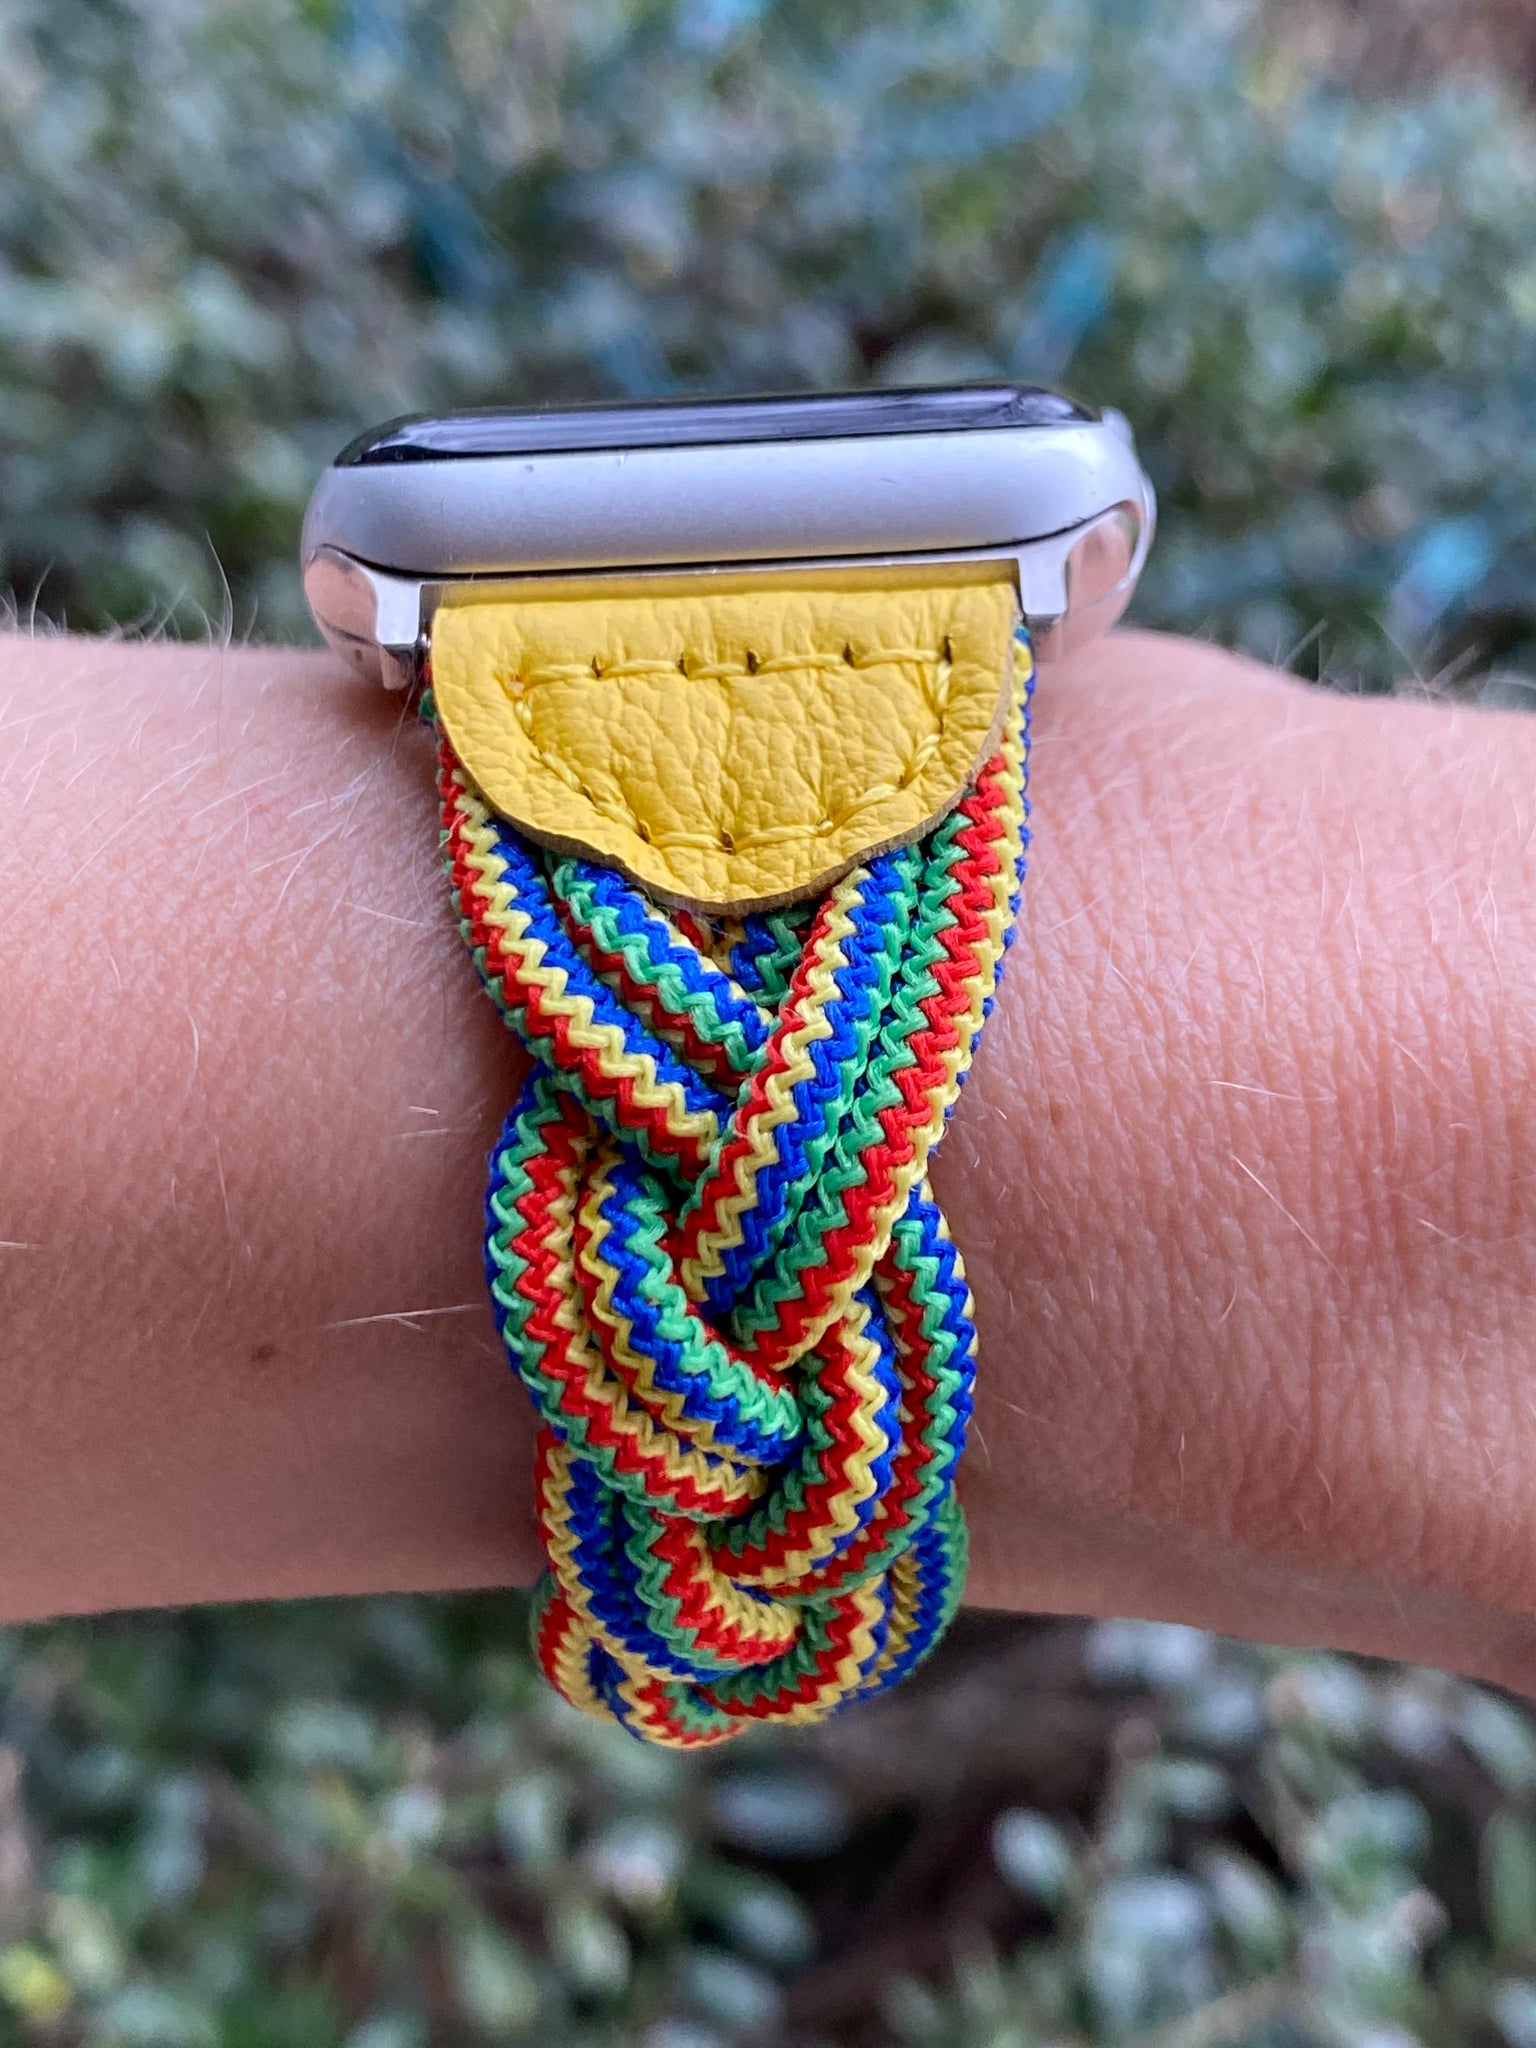 Yellow Multi Braided Solo Loop Band for Apple Watch